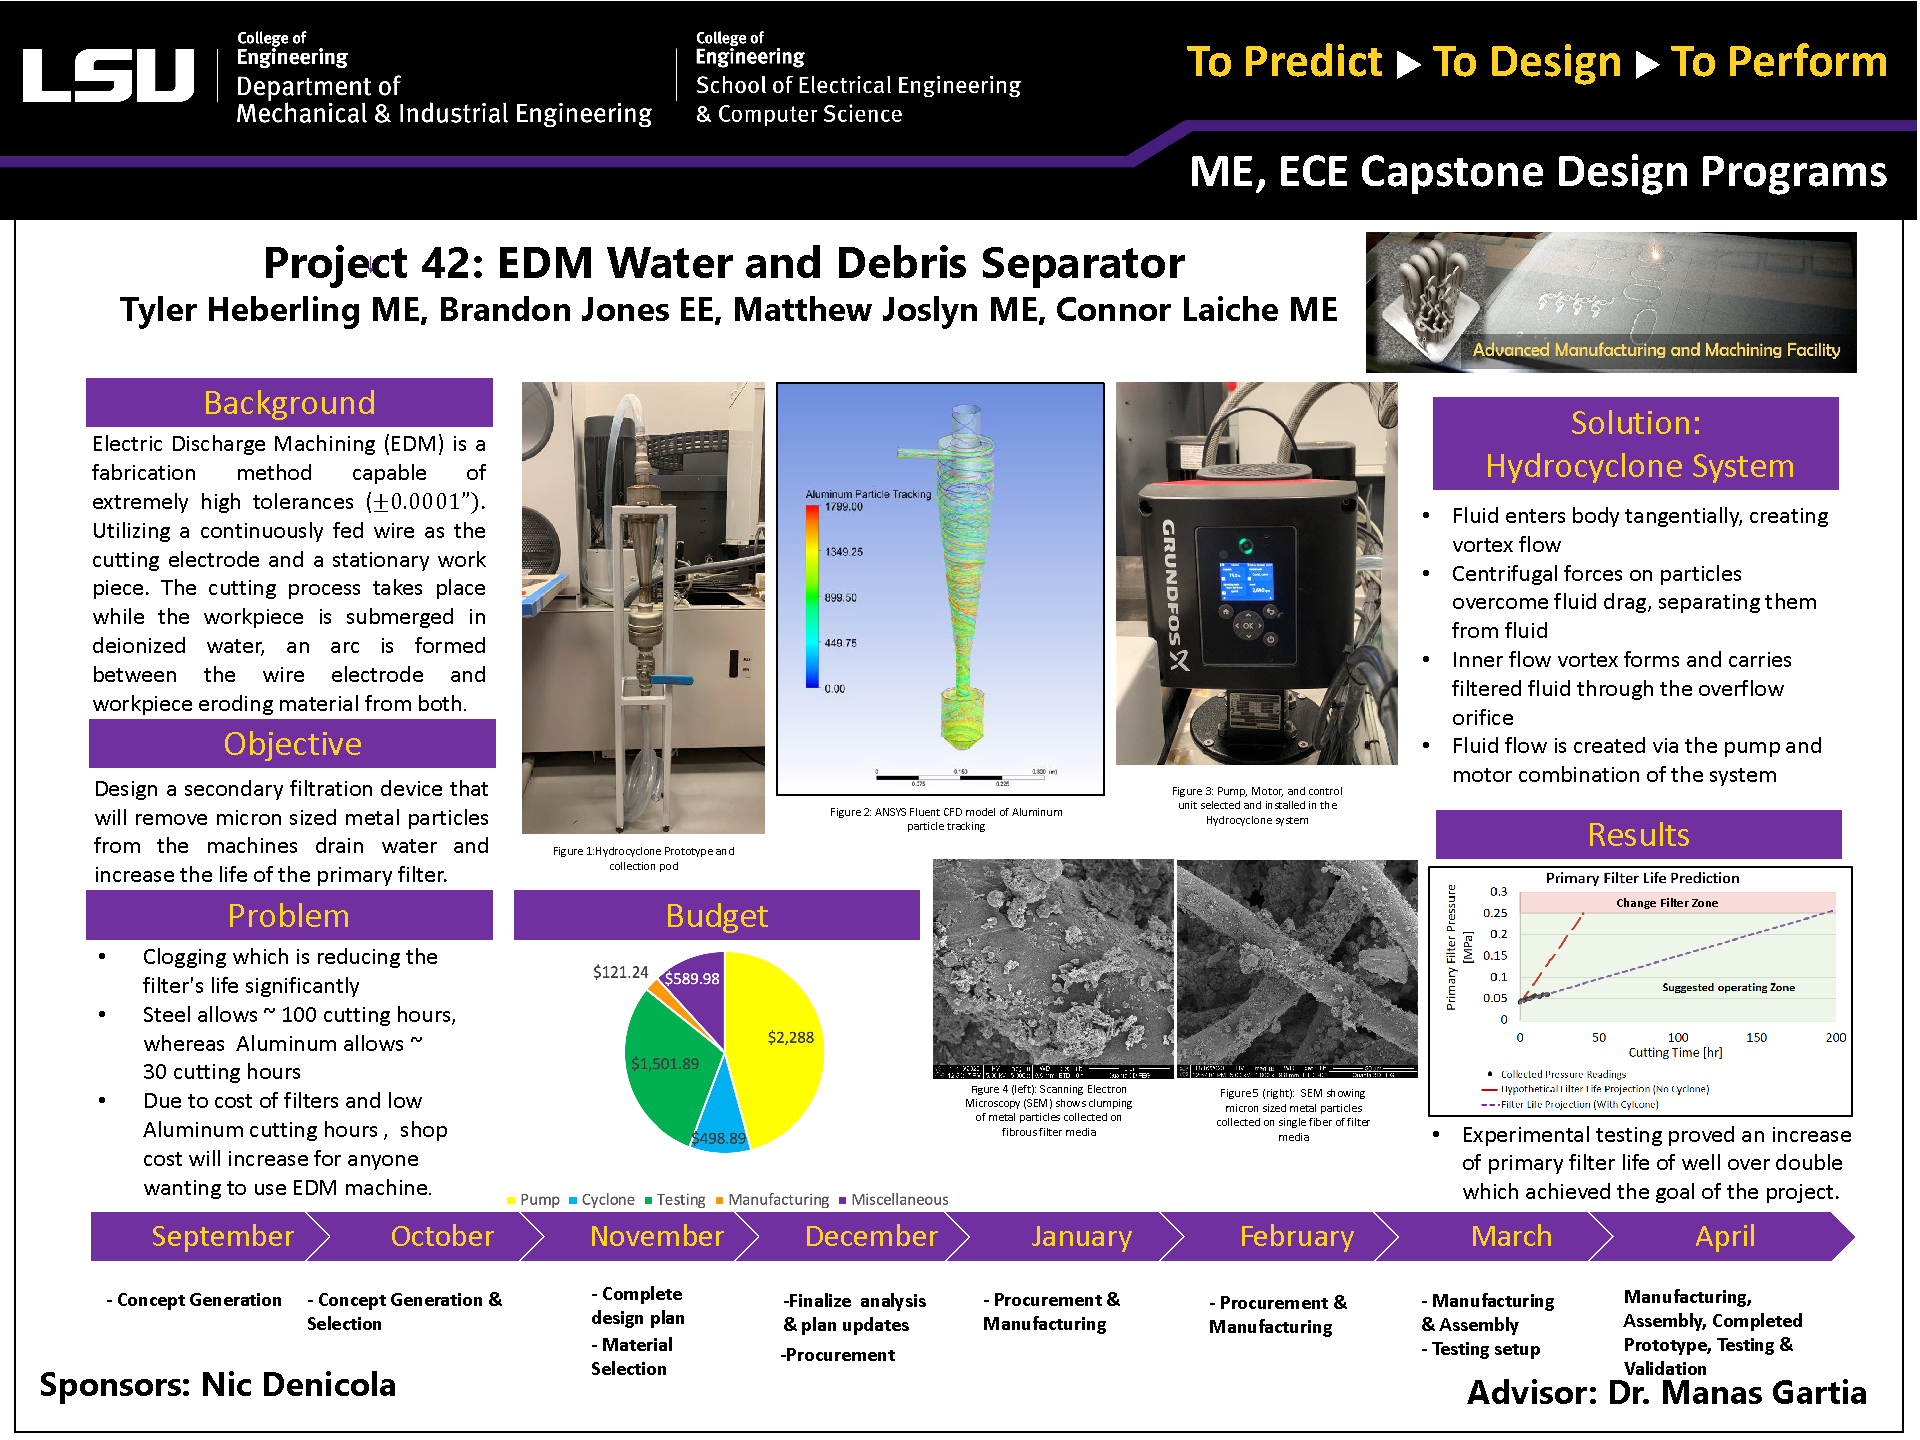 Project 42: EDM Debris and Water Separator (2021)